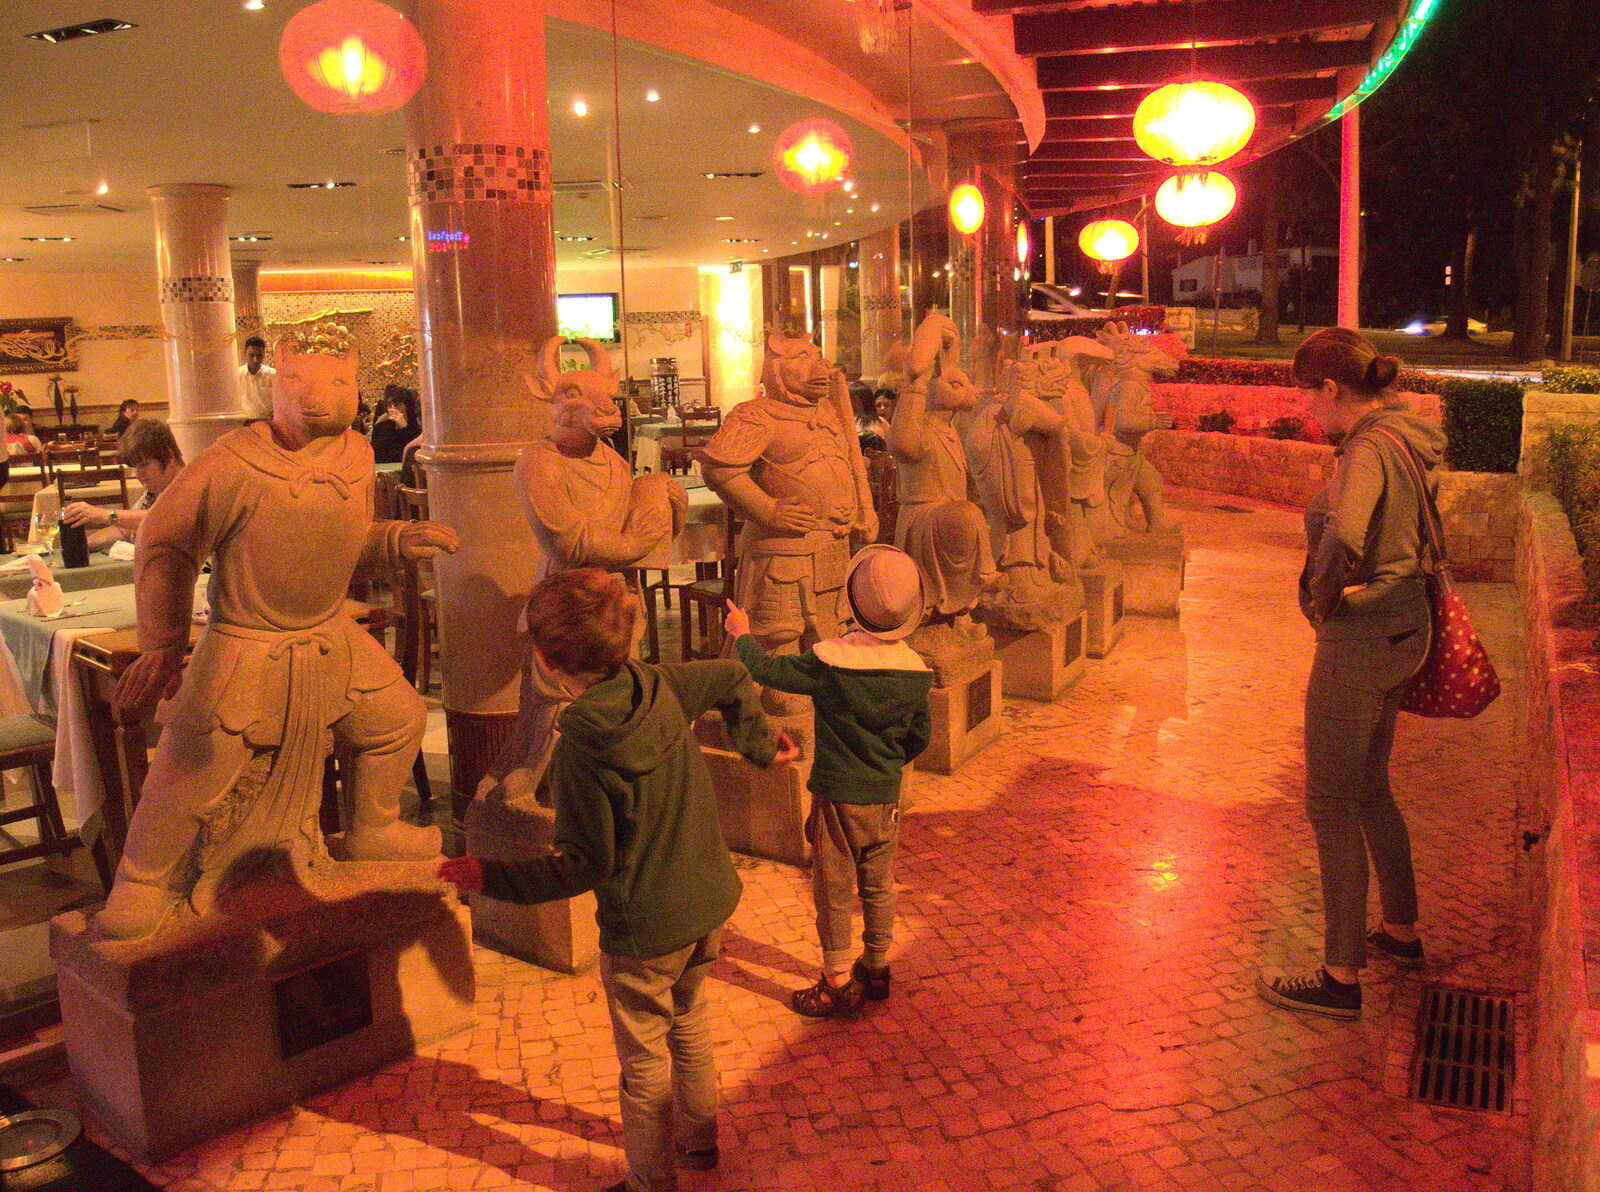 Terracotta statues by a Chinese restaurant from Last Days and the Journey Home, Albufeira, Portugal - 9th April 2016